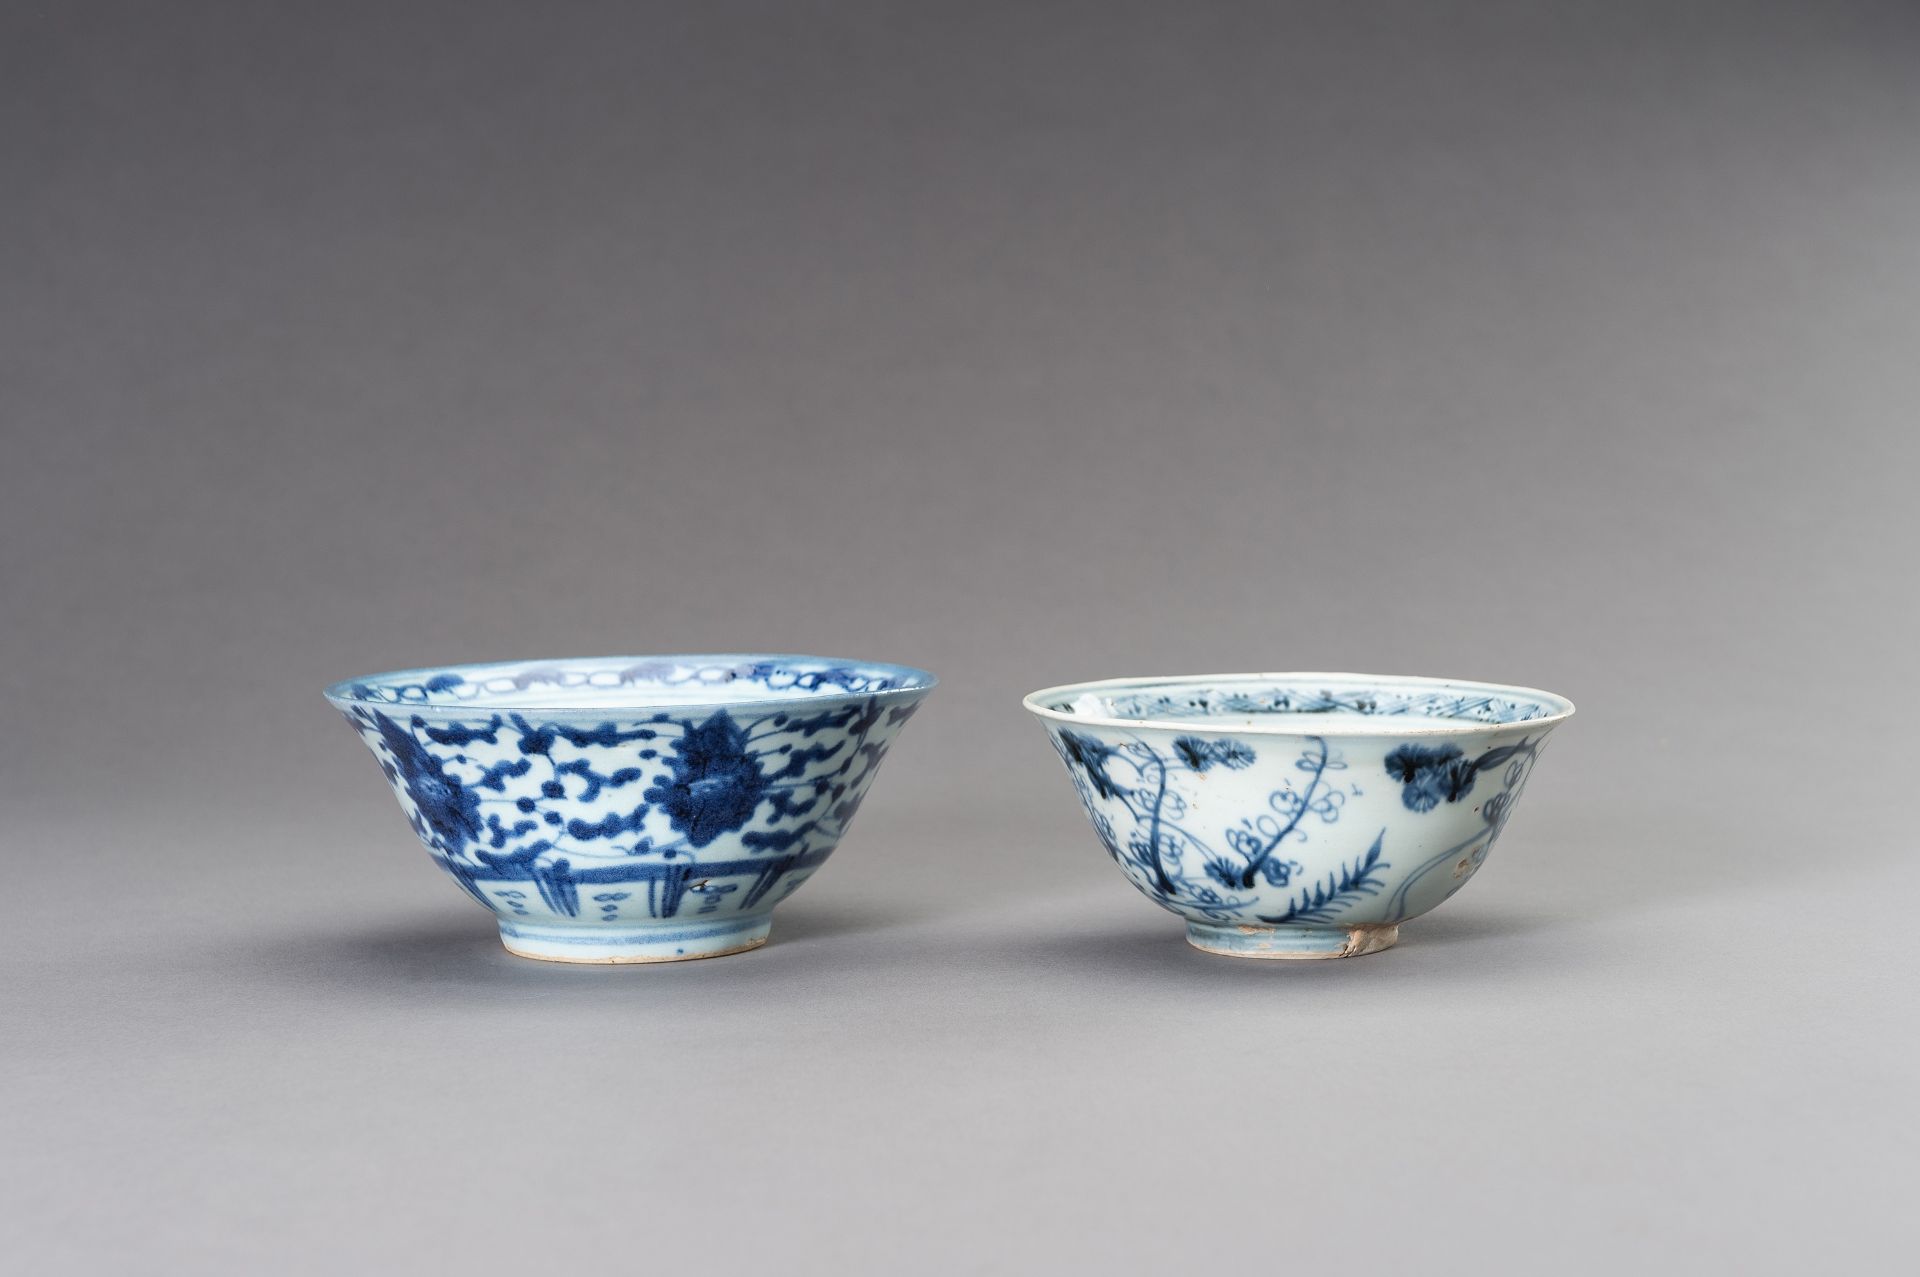 A SET OF TWO BLUE AND WHITE 'FLORAL' BOWLS, TRANSITIONAL PERIOD - Image 5 of 10